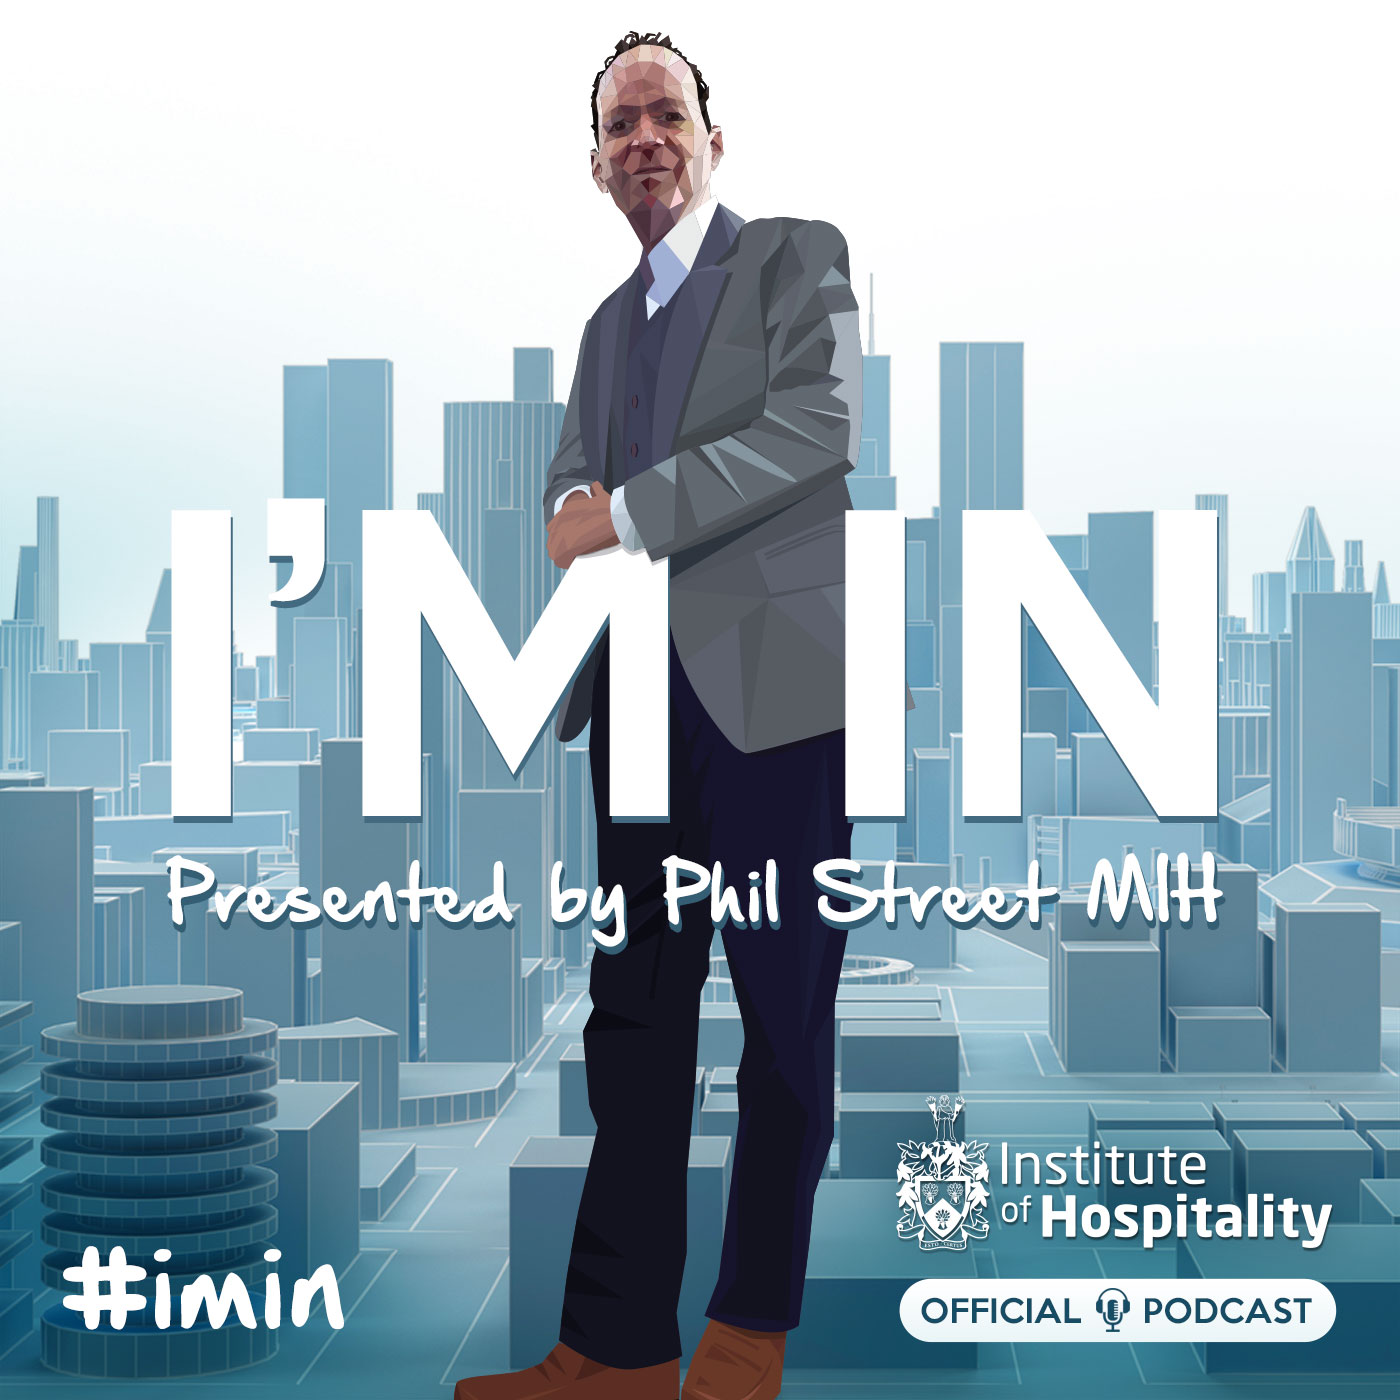 Artwork for "I'm In": The Official Institute of Hospitality Podcast